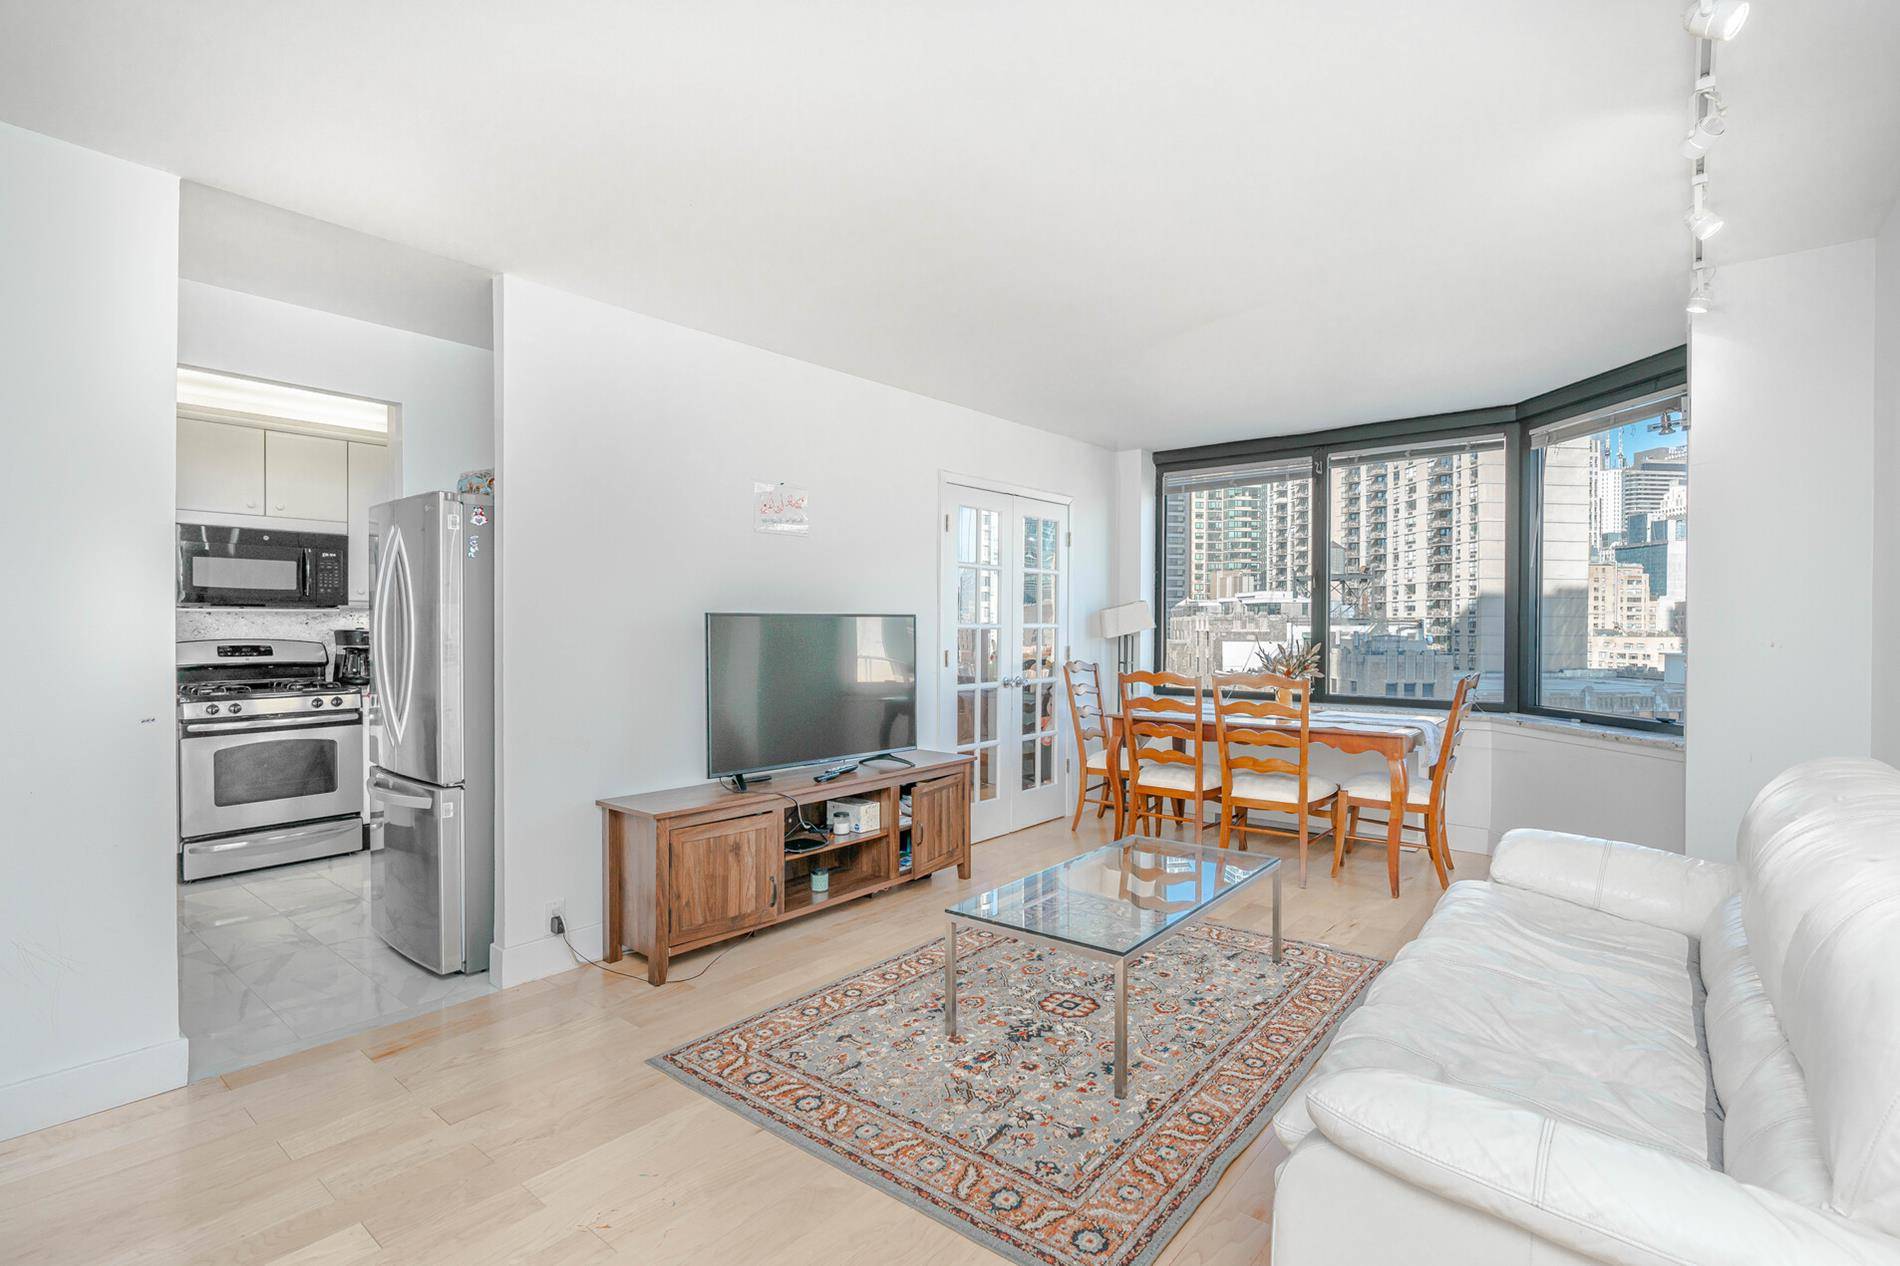 Two Bedroom, Two Bathroom 2 Bed 2 Bath, With DRAMATIC CITY AND SLIVER OF RIVER, Empire State Bldg Views.